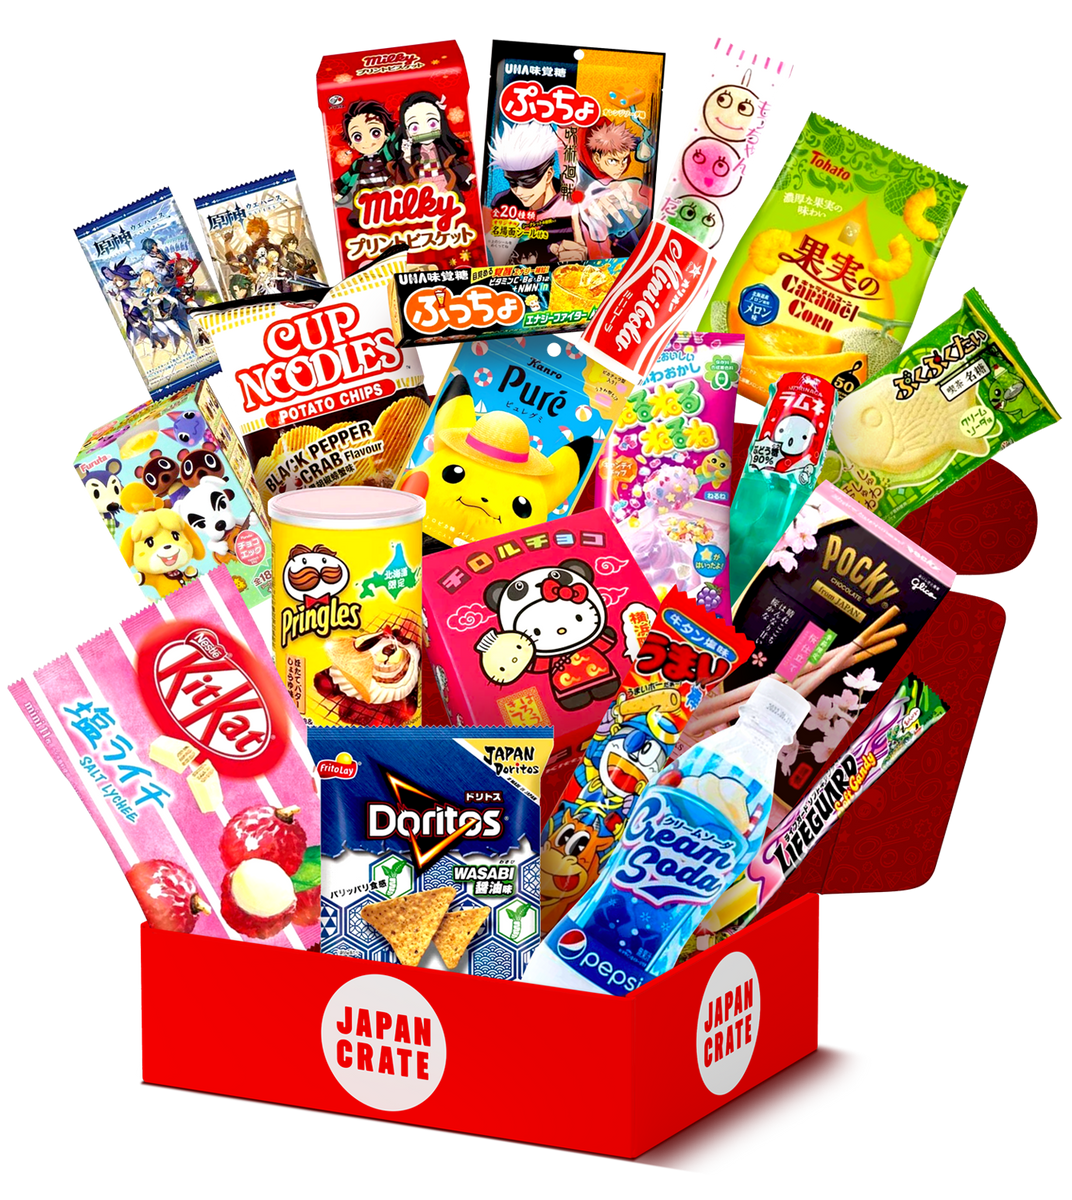 Japan Crate, Japanese Subscription Boxes